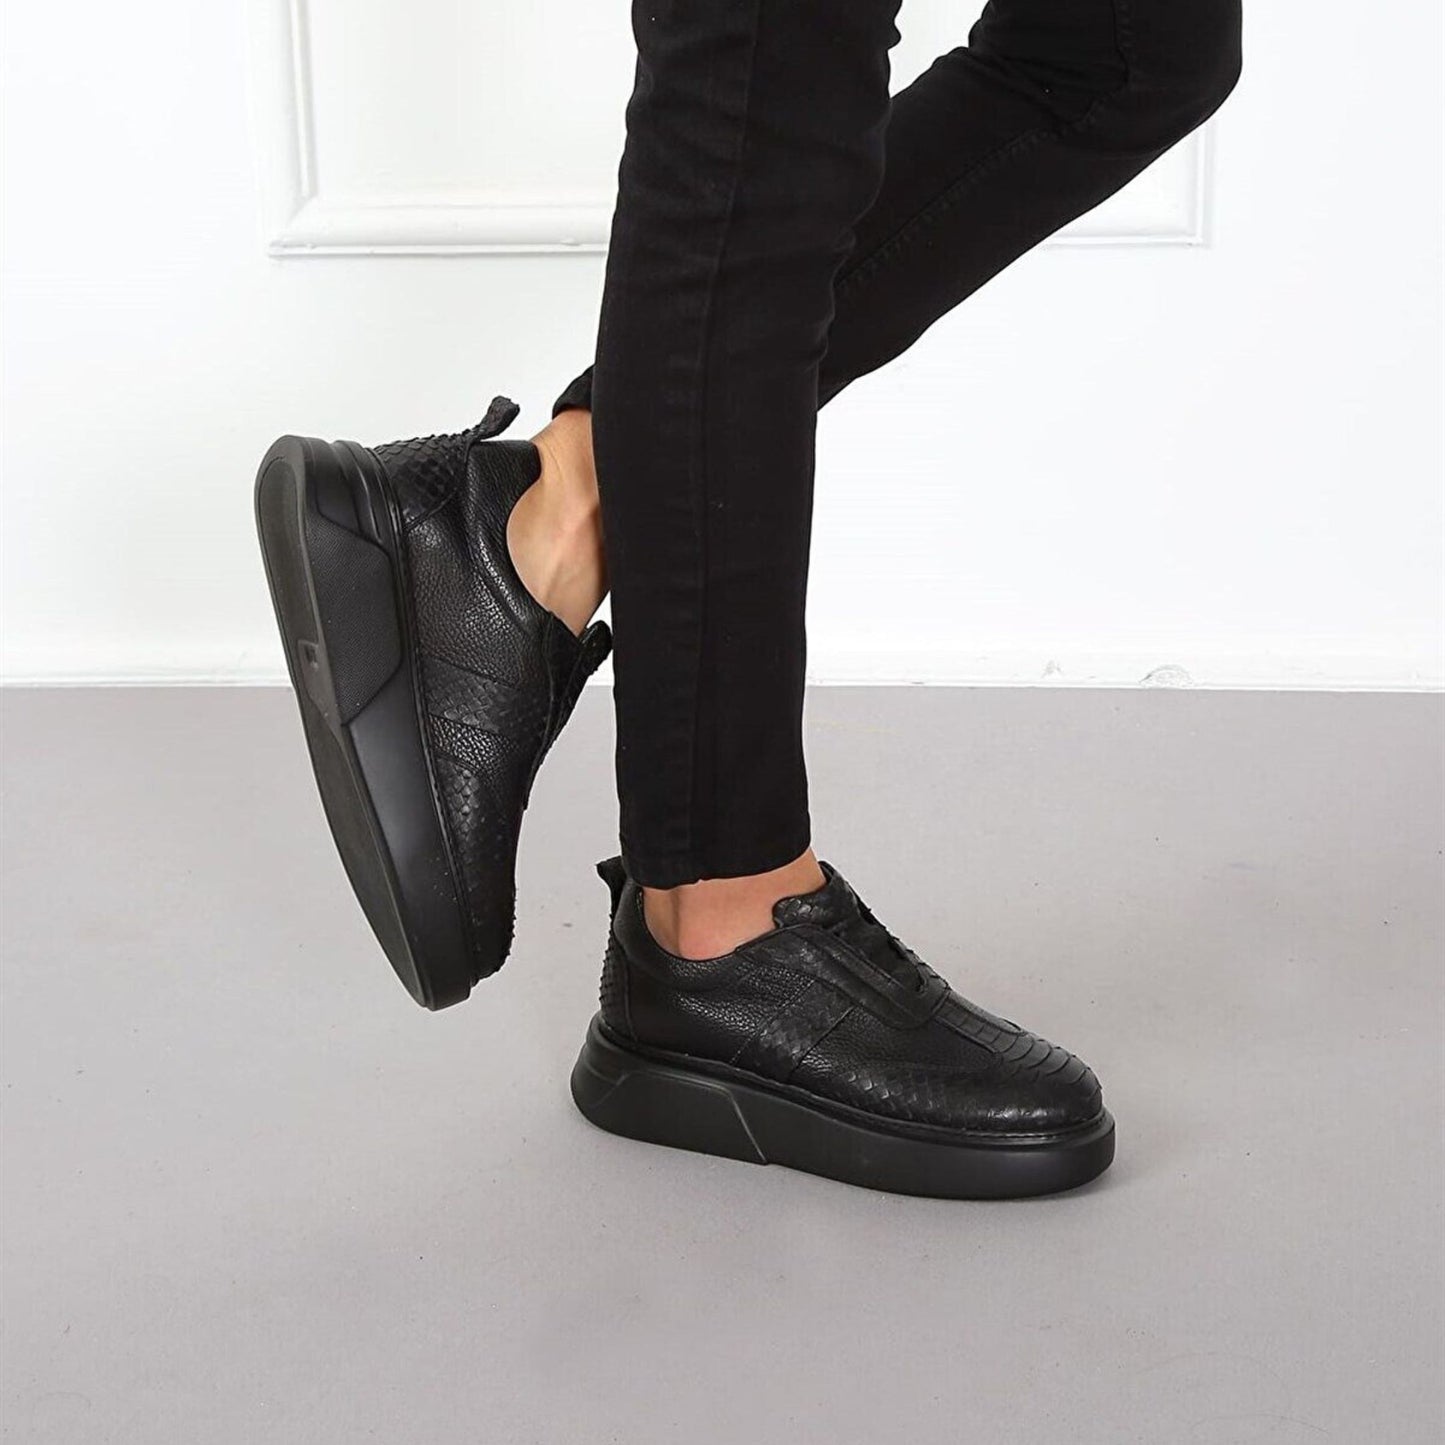 Madasat Black Leather Casual Shoes - 490 |